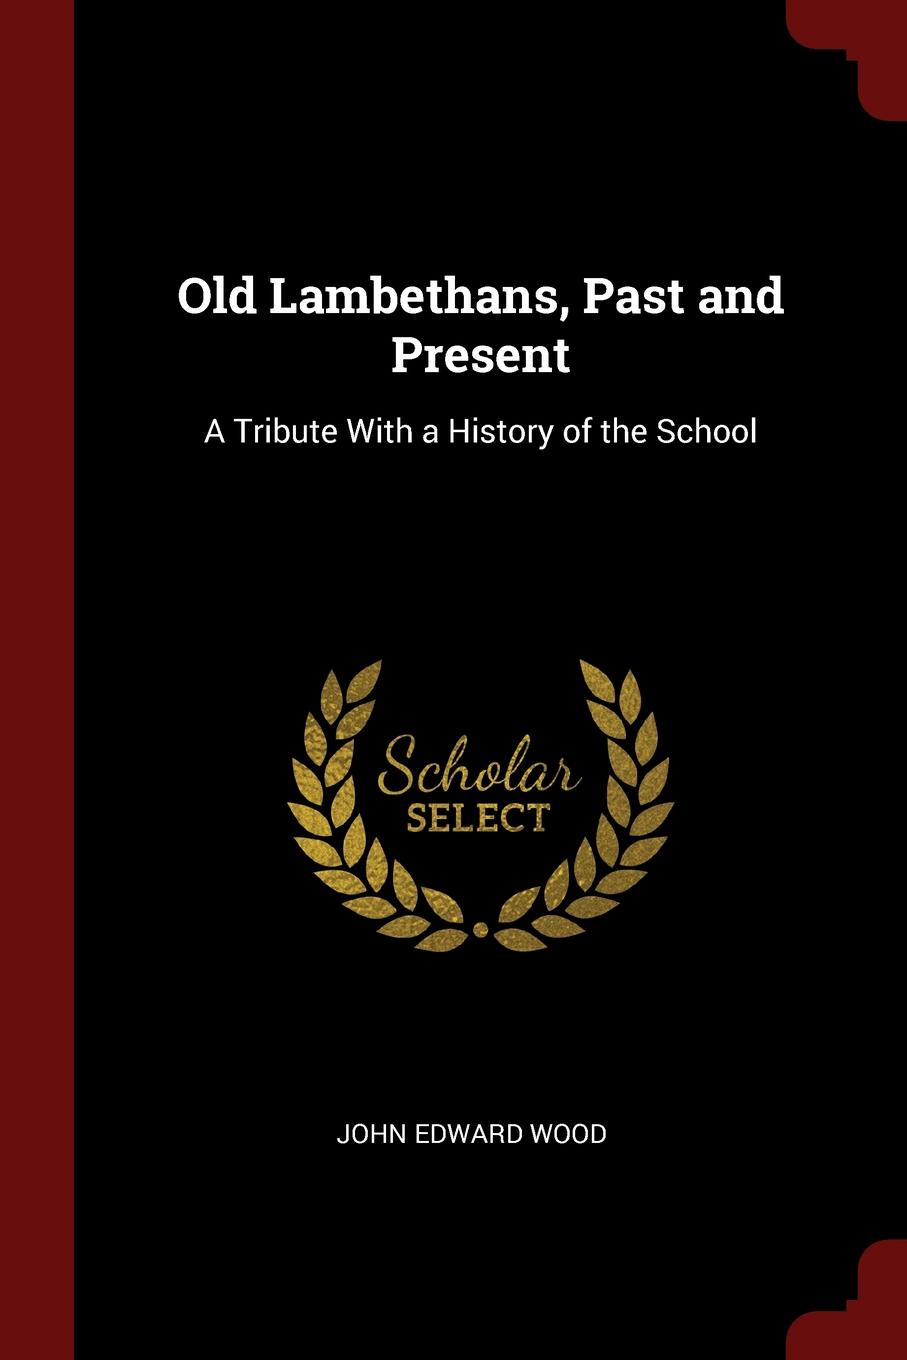 Old Lambethans, Past and Present. A Tribute With a History of the School